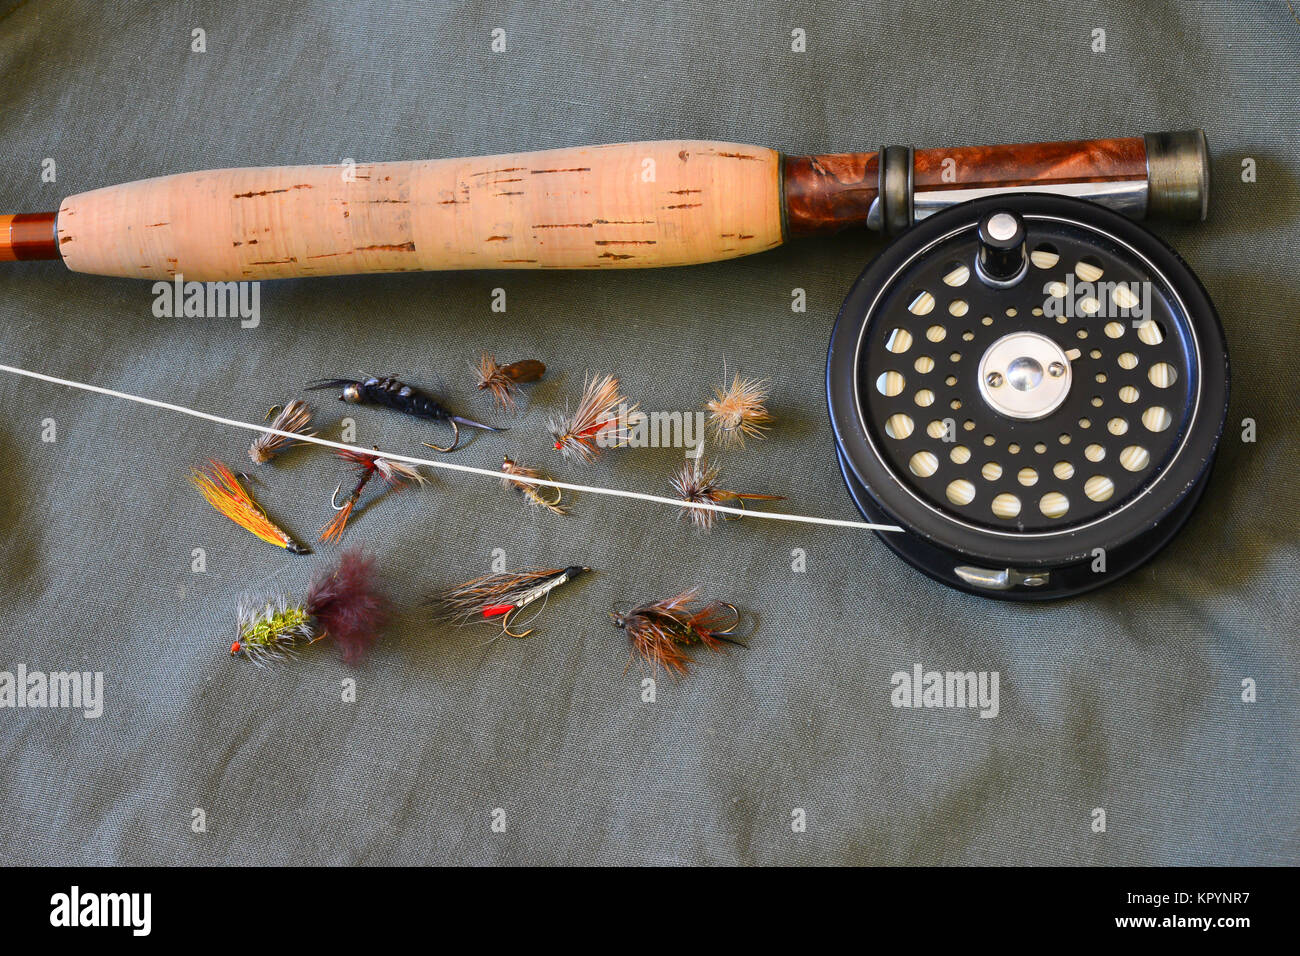 Custom bamboo fly rod, reel, line and an assortment of flies for